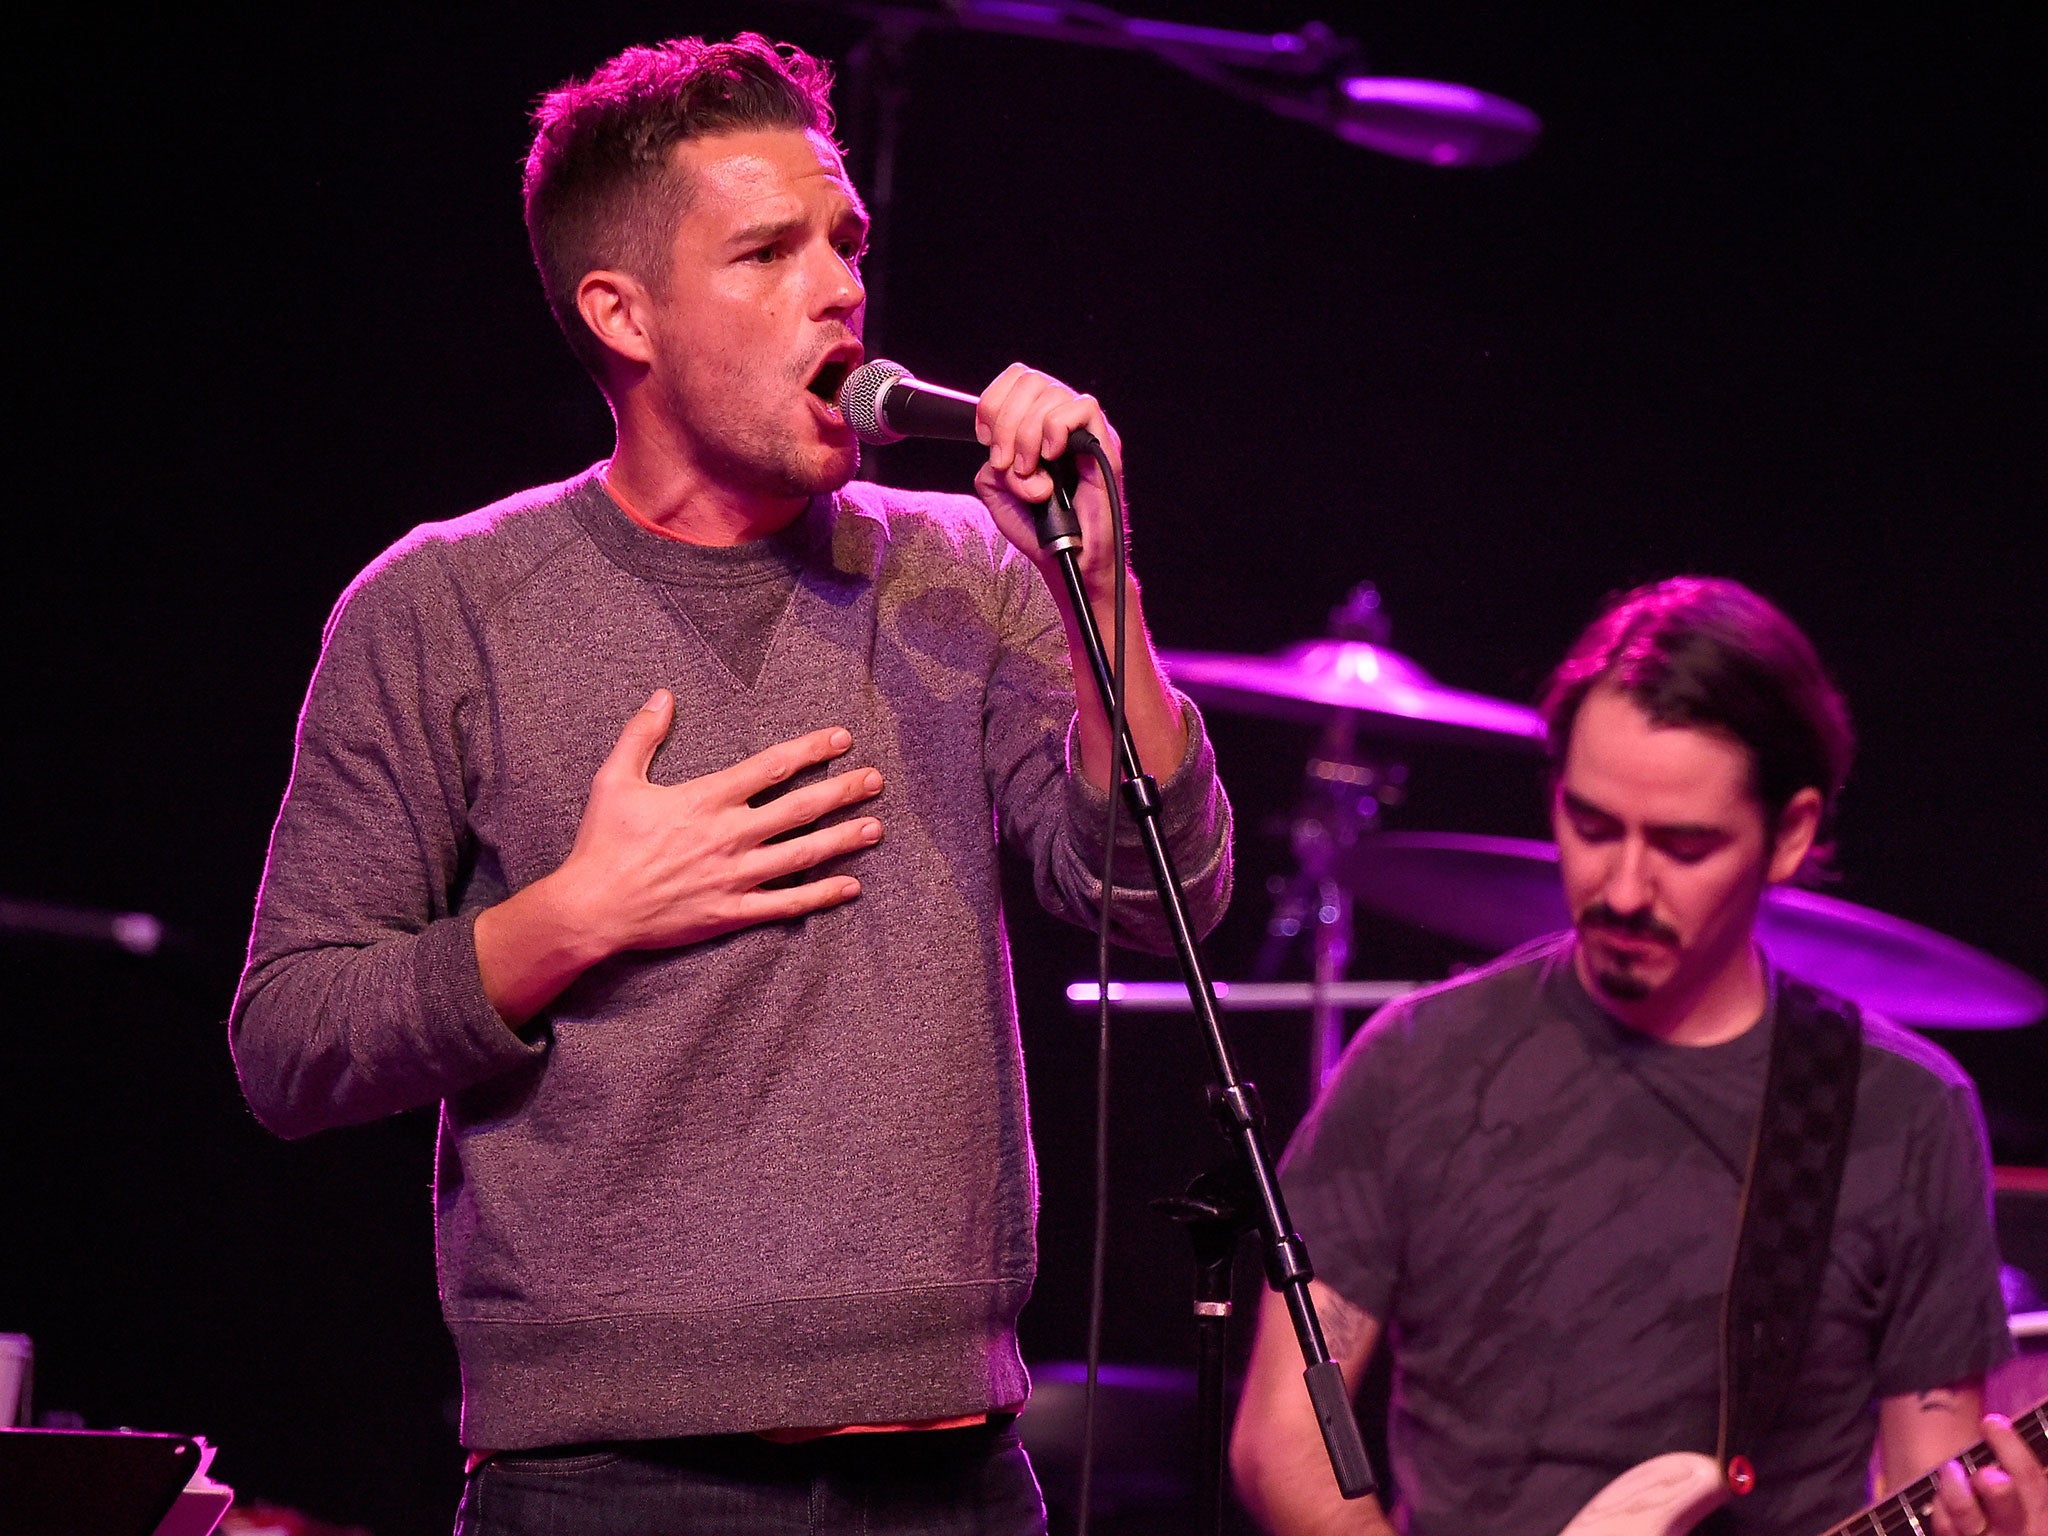 Brandon Flowers of The Killers also has a solo career